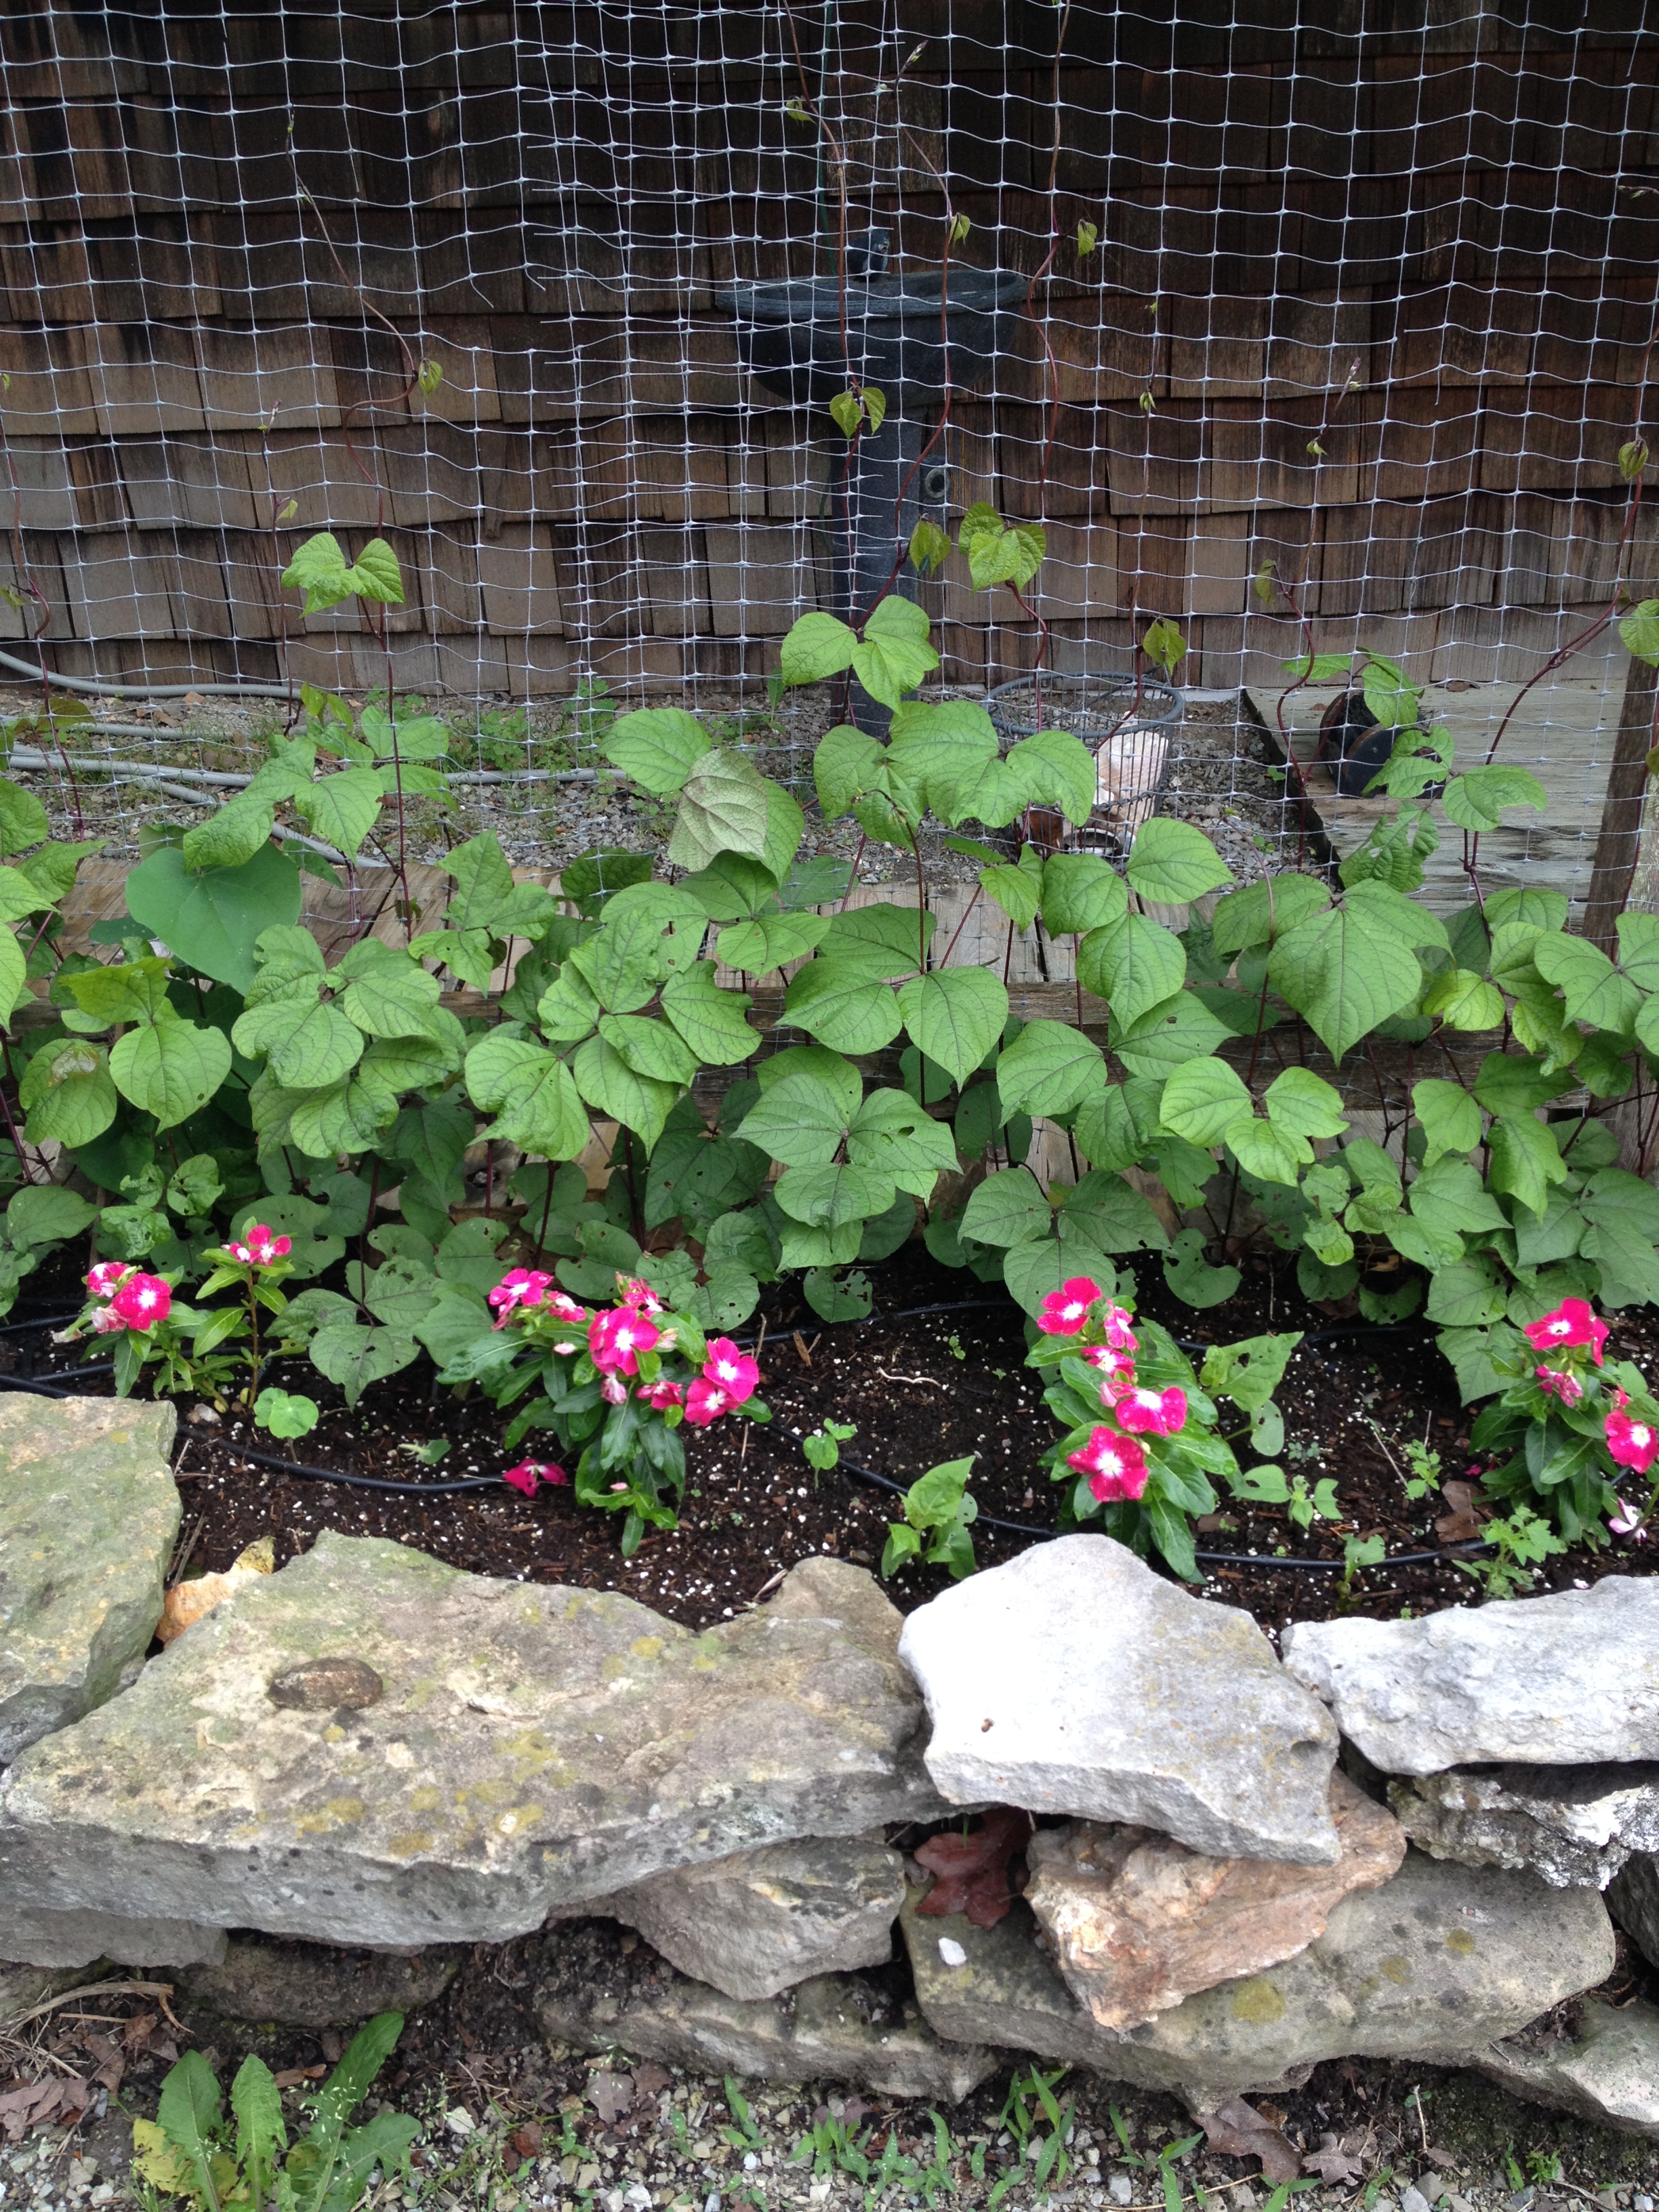 hyacinth bean vines weaving their way up the wall